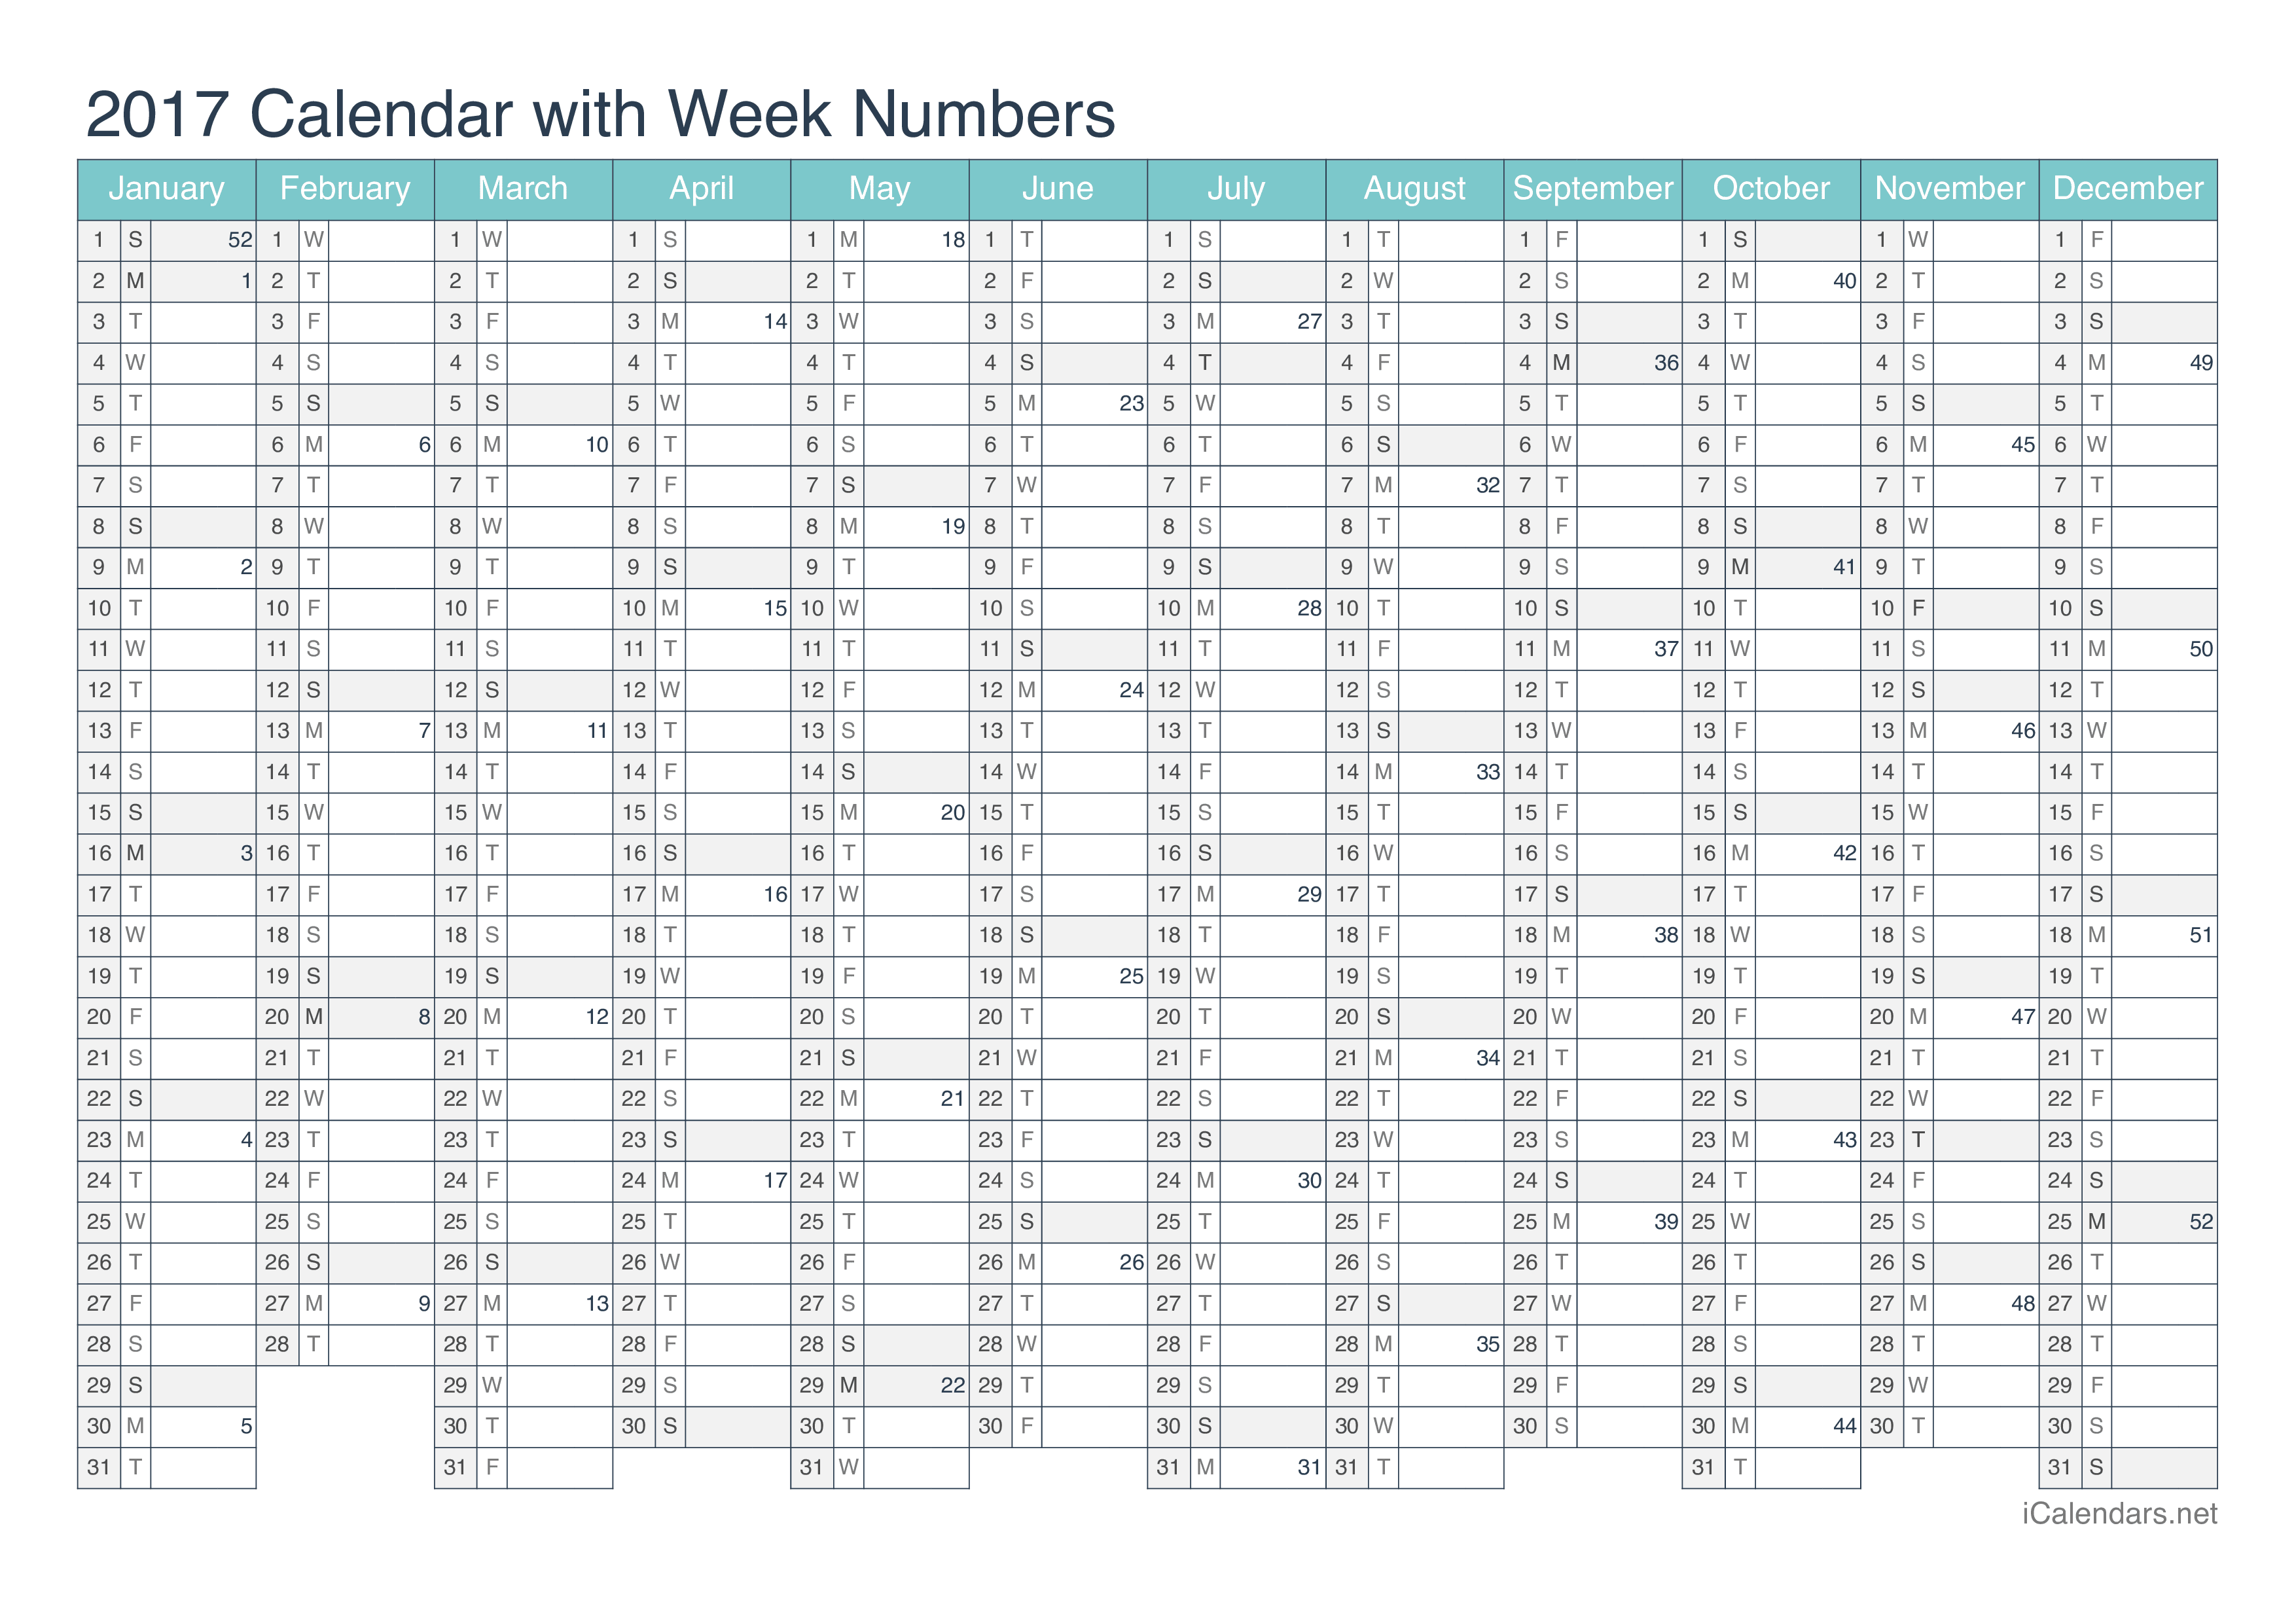 2017 Calendar with week numbers - Turquoise